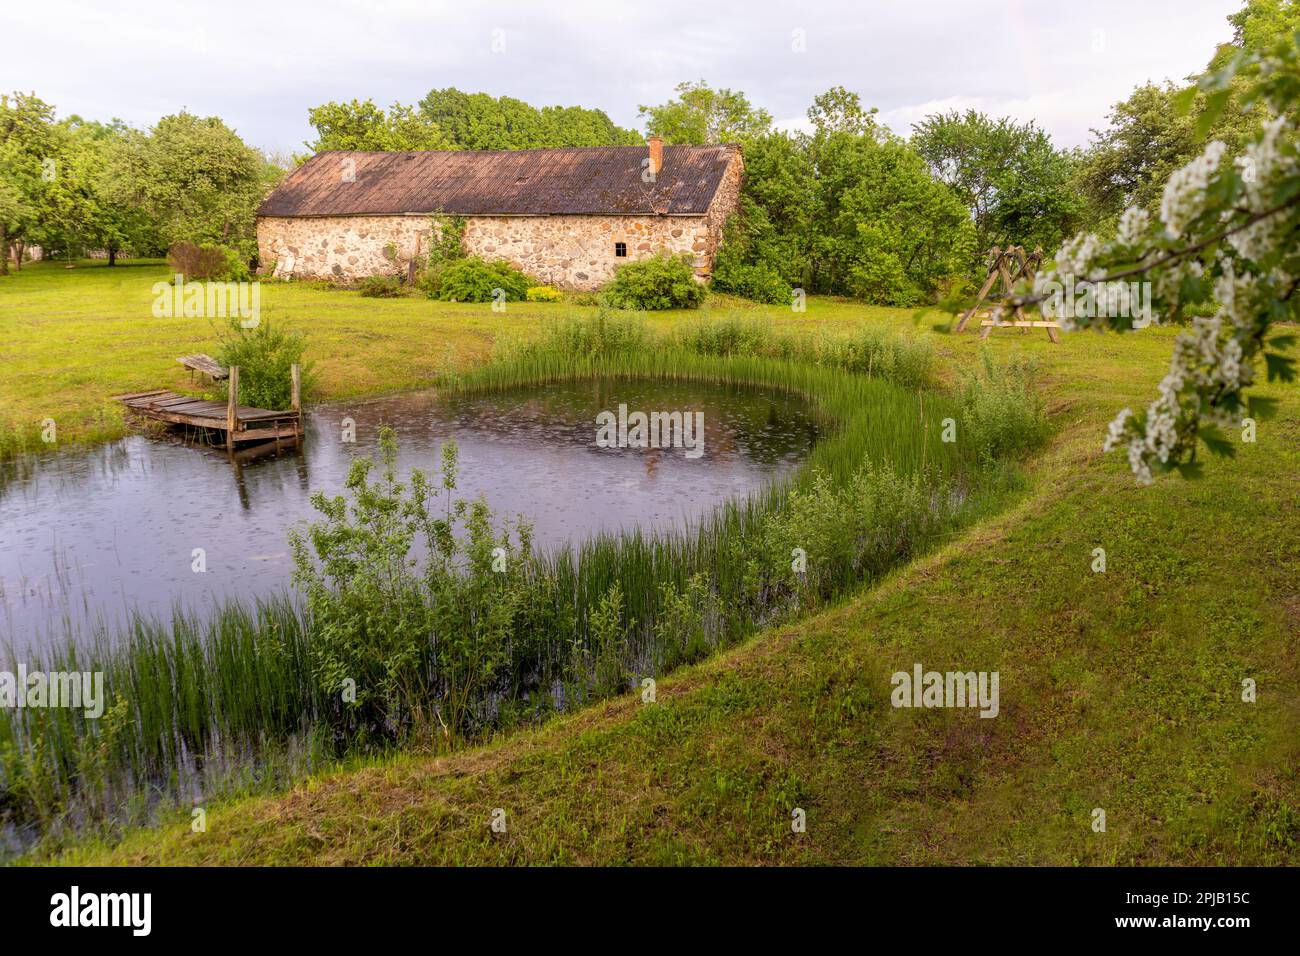 A house in the woods with a pond in the foreground Stock Photo